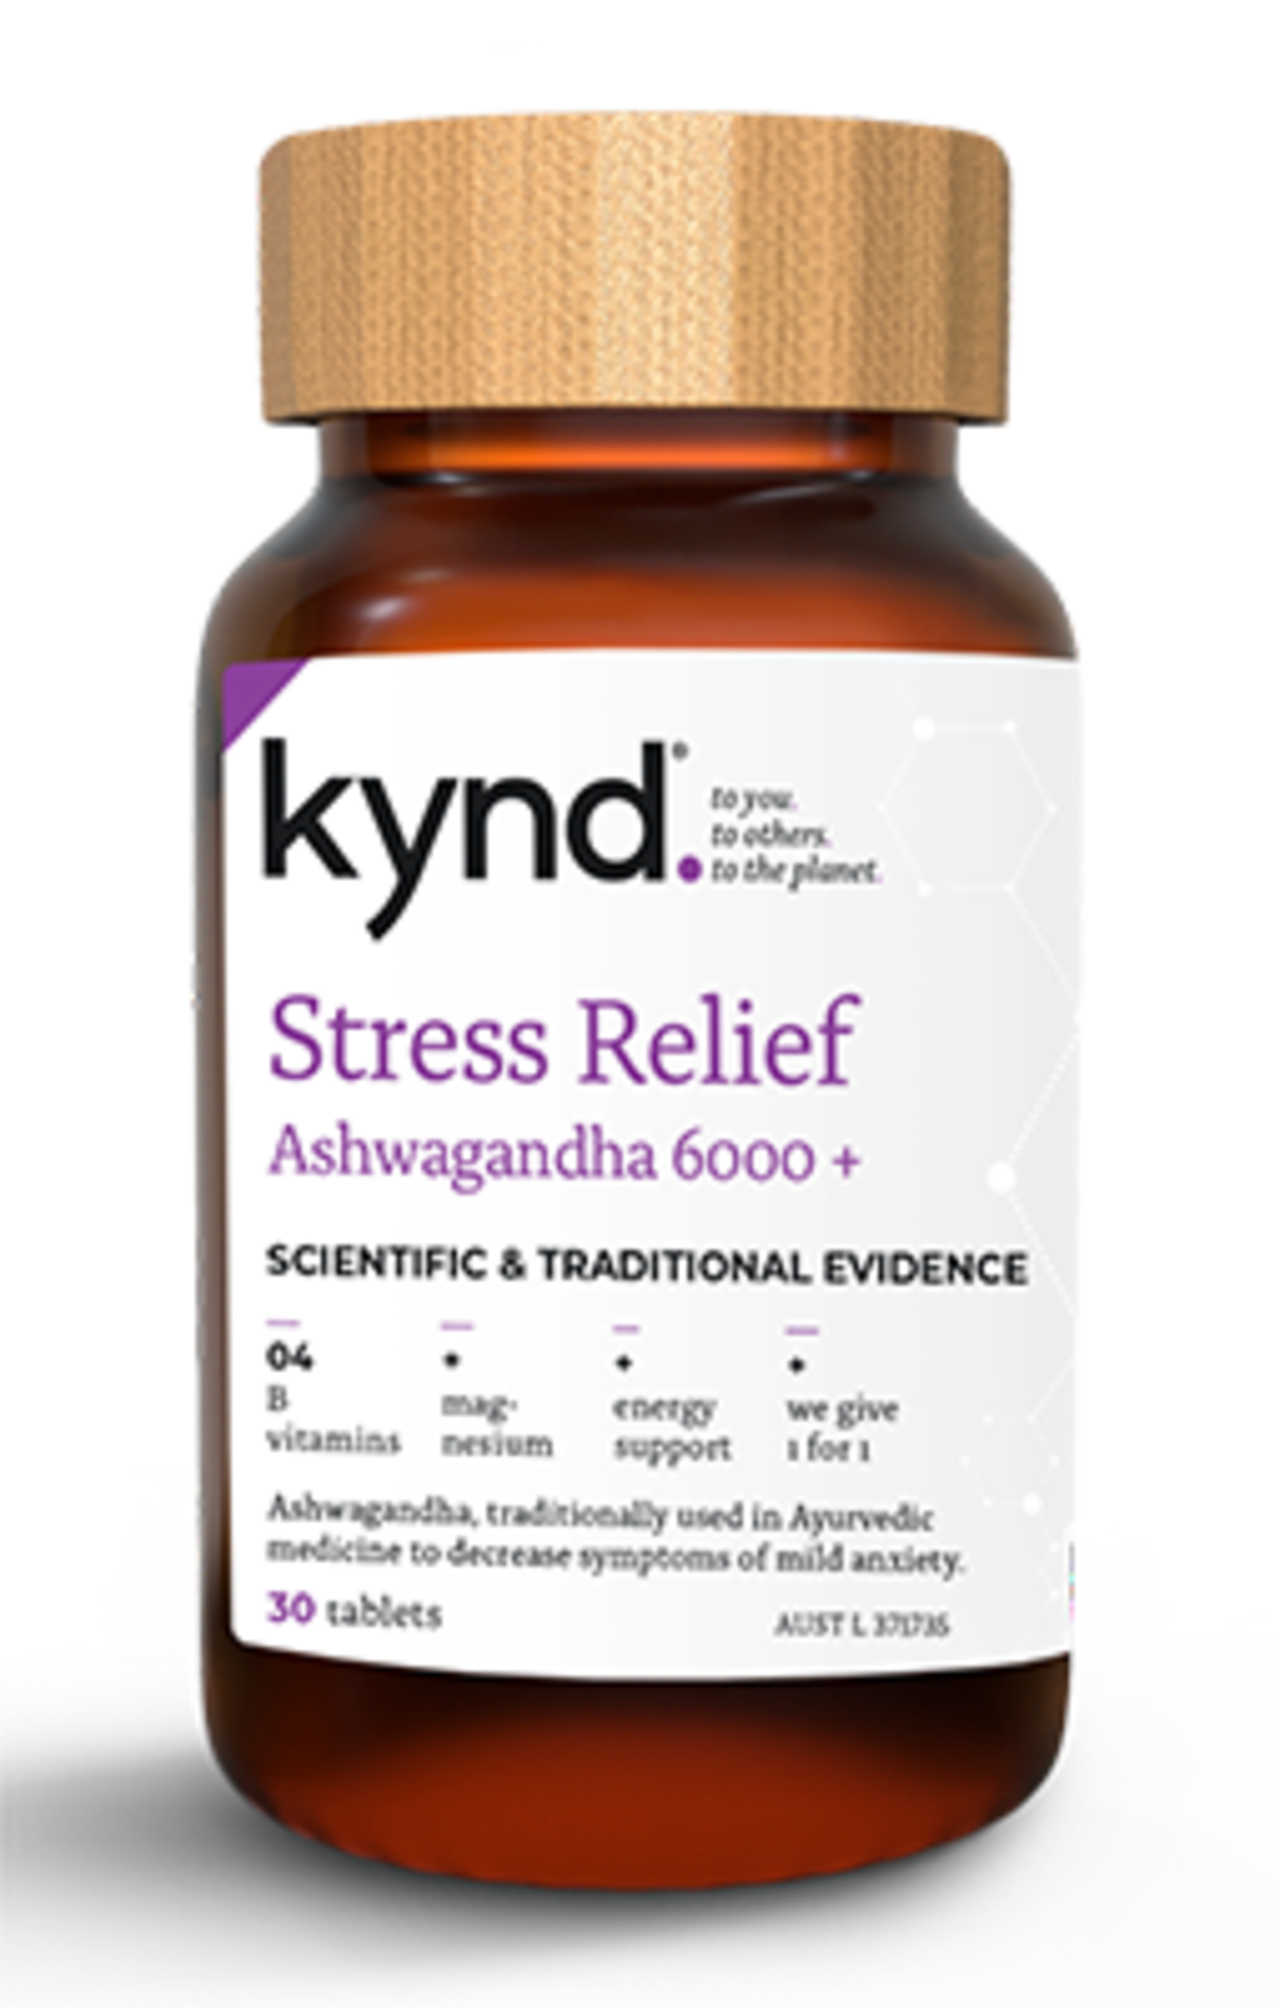 A batch of Kynd Stress Relief tablets have been recalled following reports of unexpected allergic reactions.